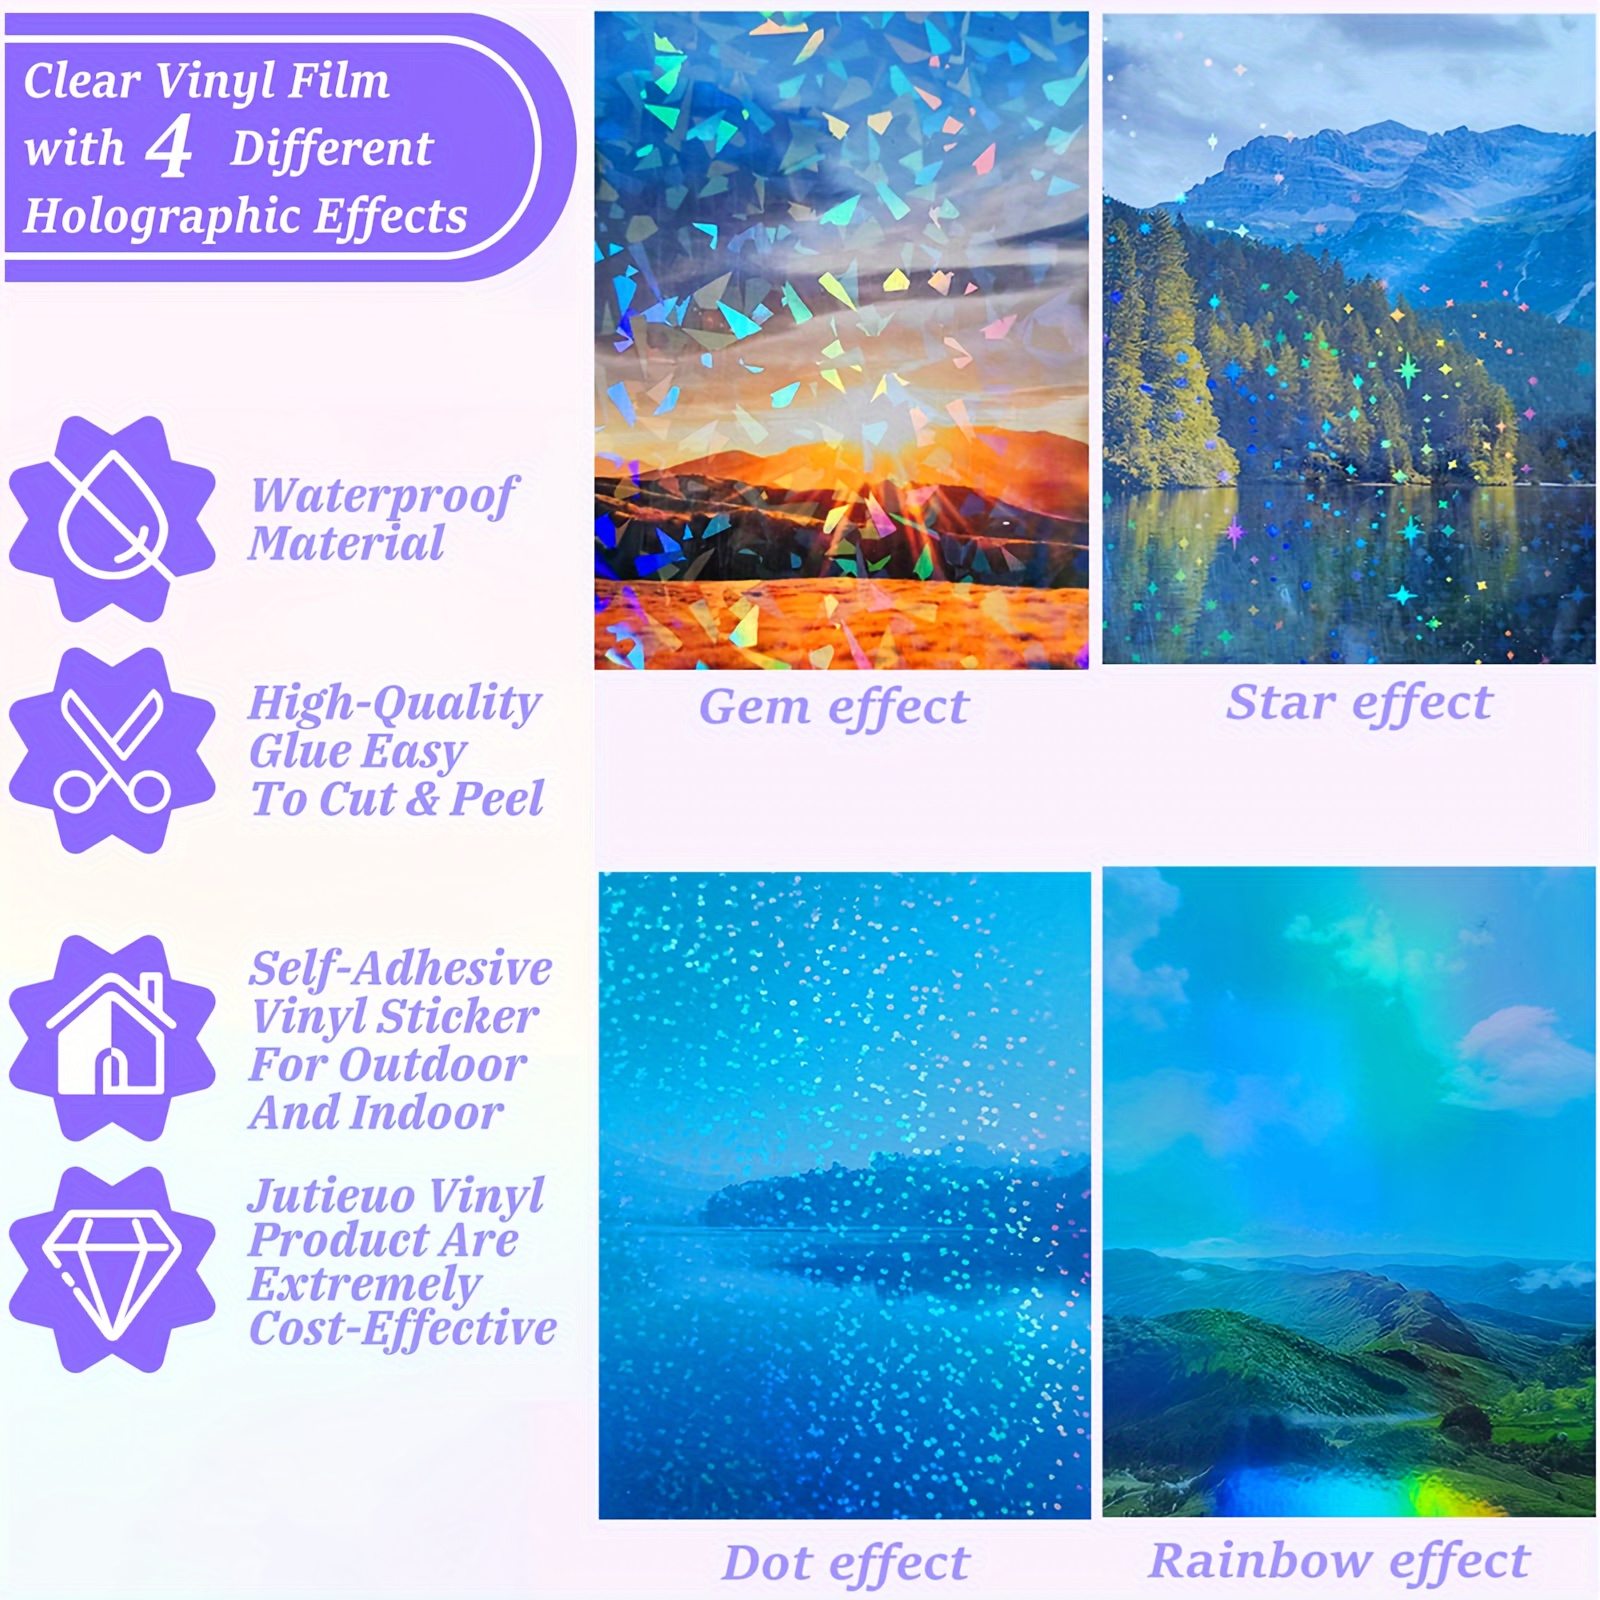 Printable Translucent Holographic Vinyl Paper | Mixed Pattern 36 Pack